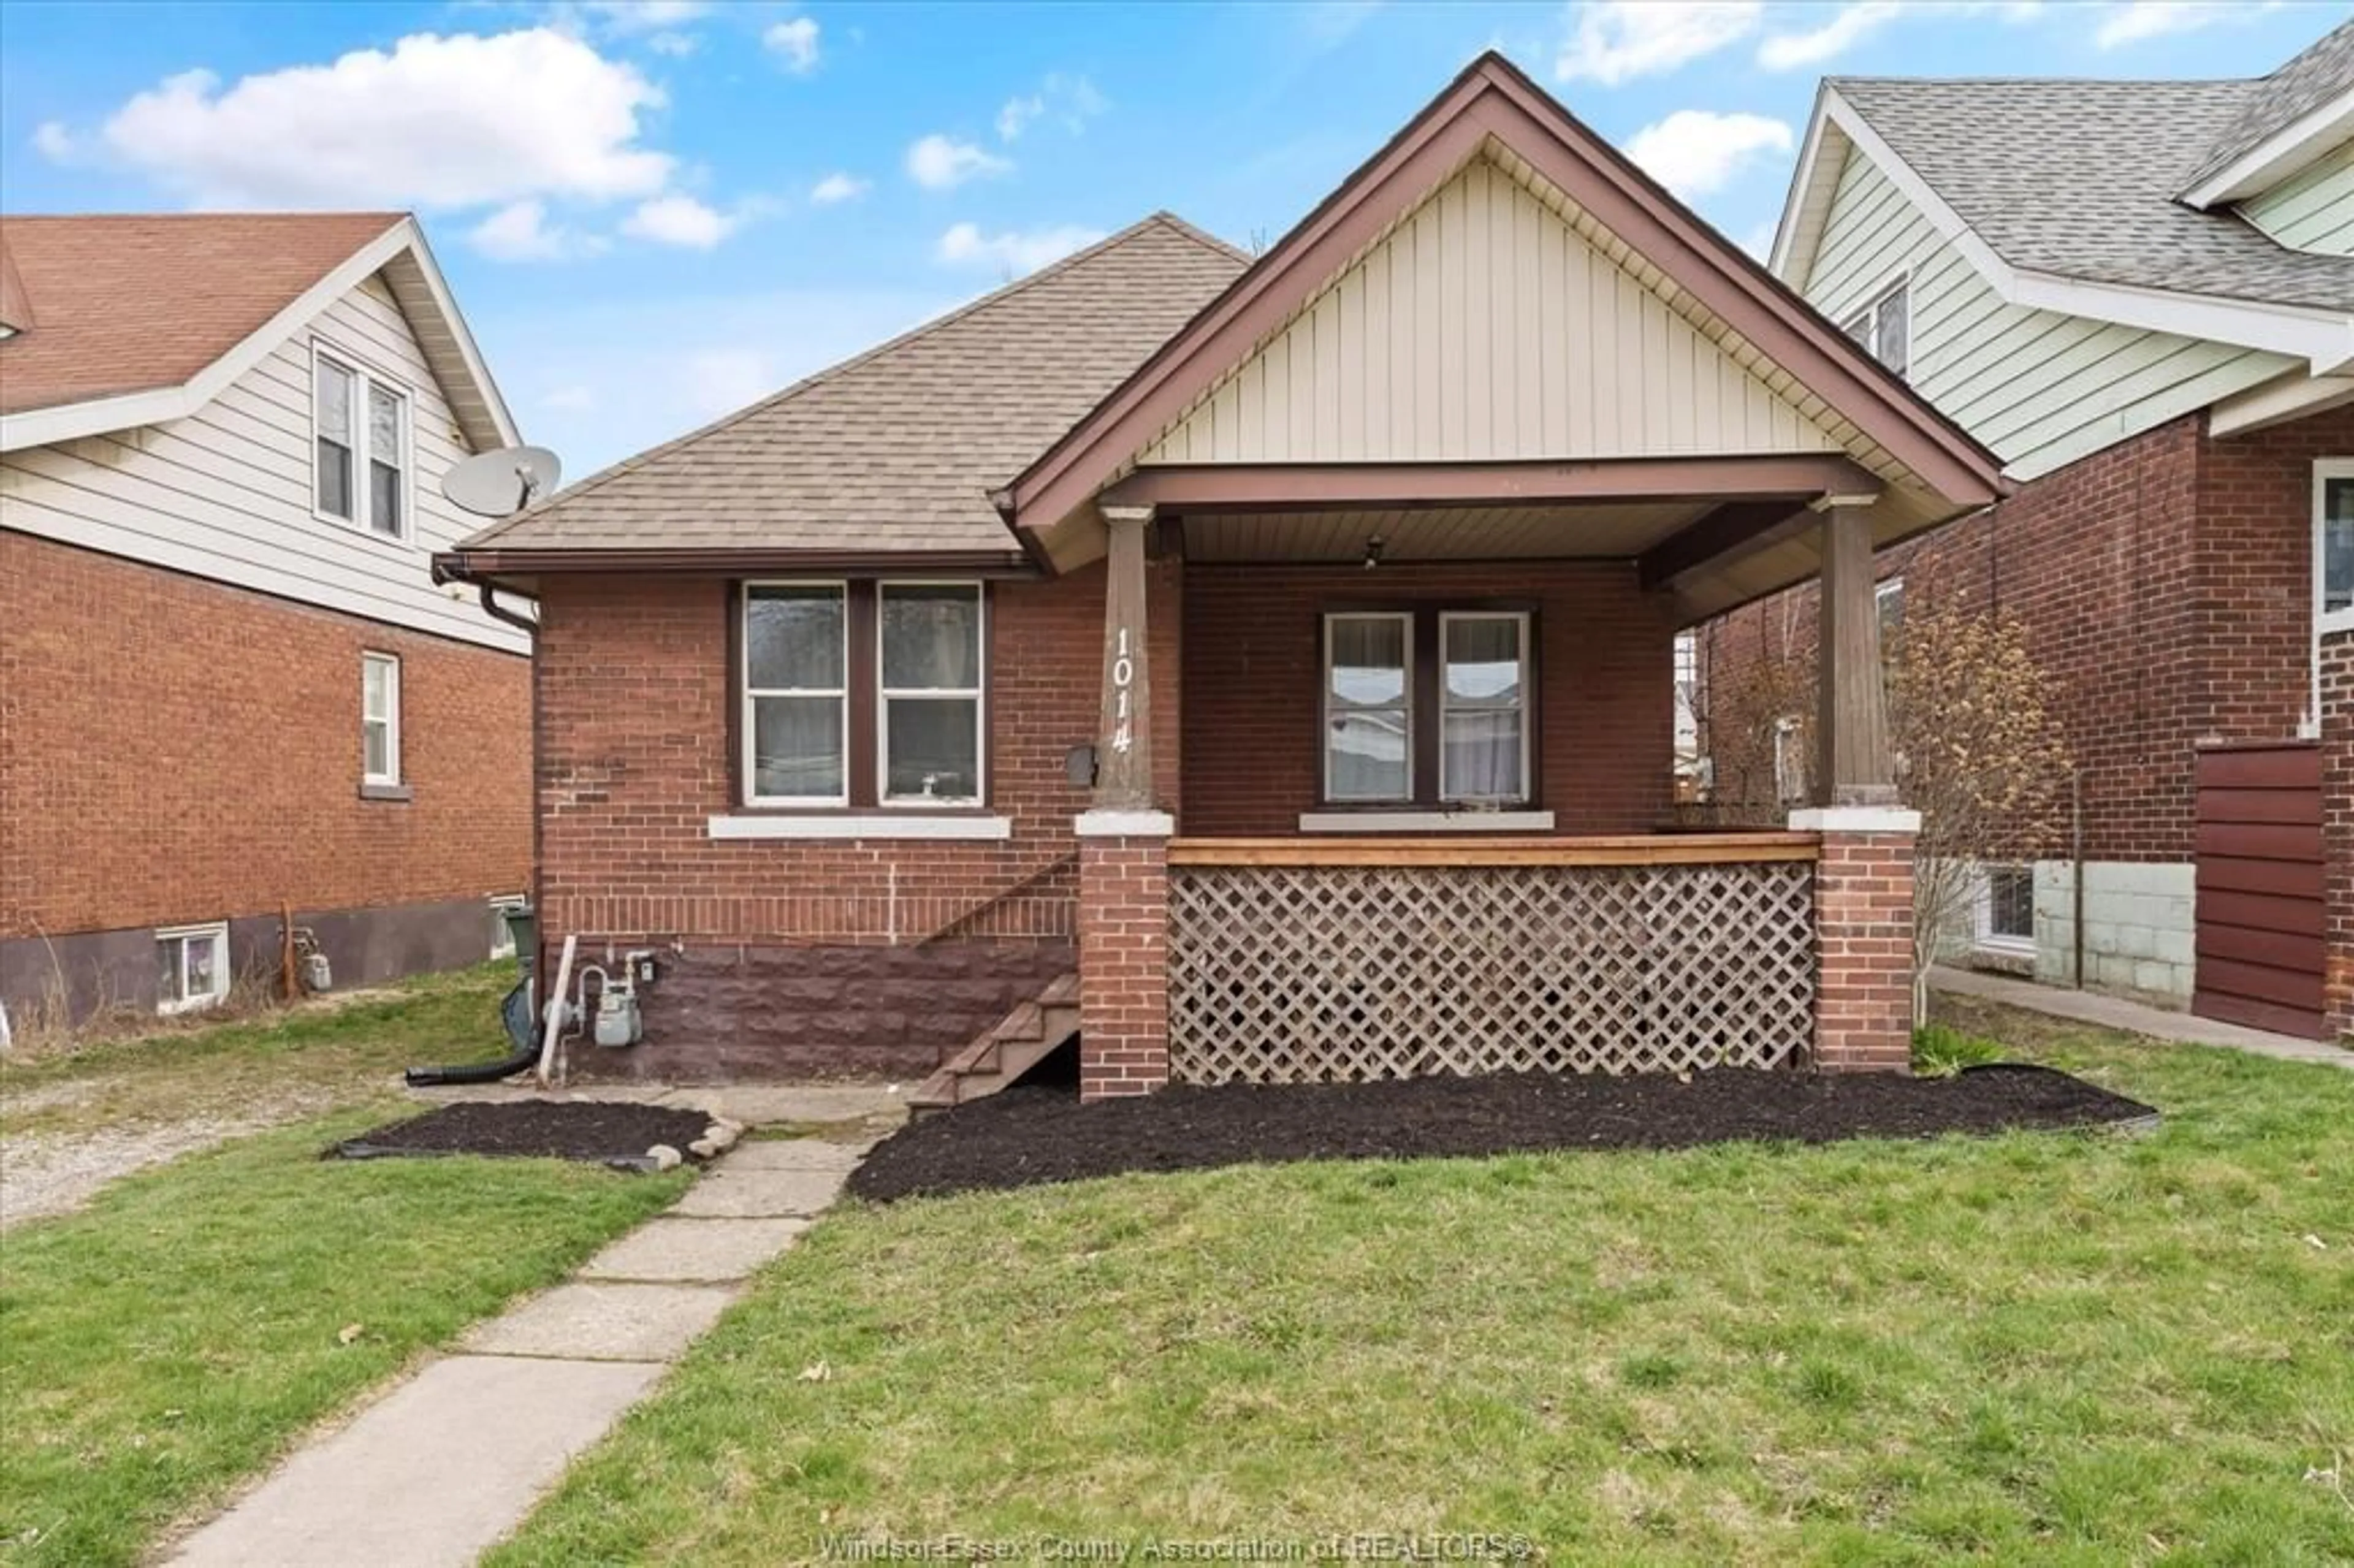 Home with brick exterior material for 1014 Felix Ave, Windsor Ontario N9C 3L5